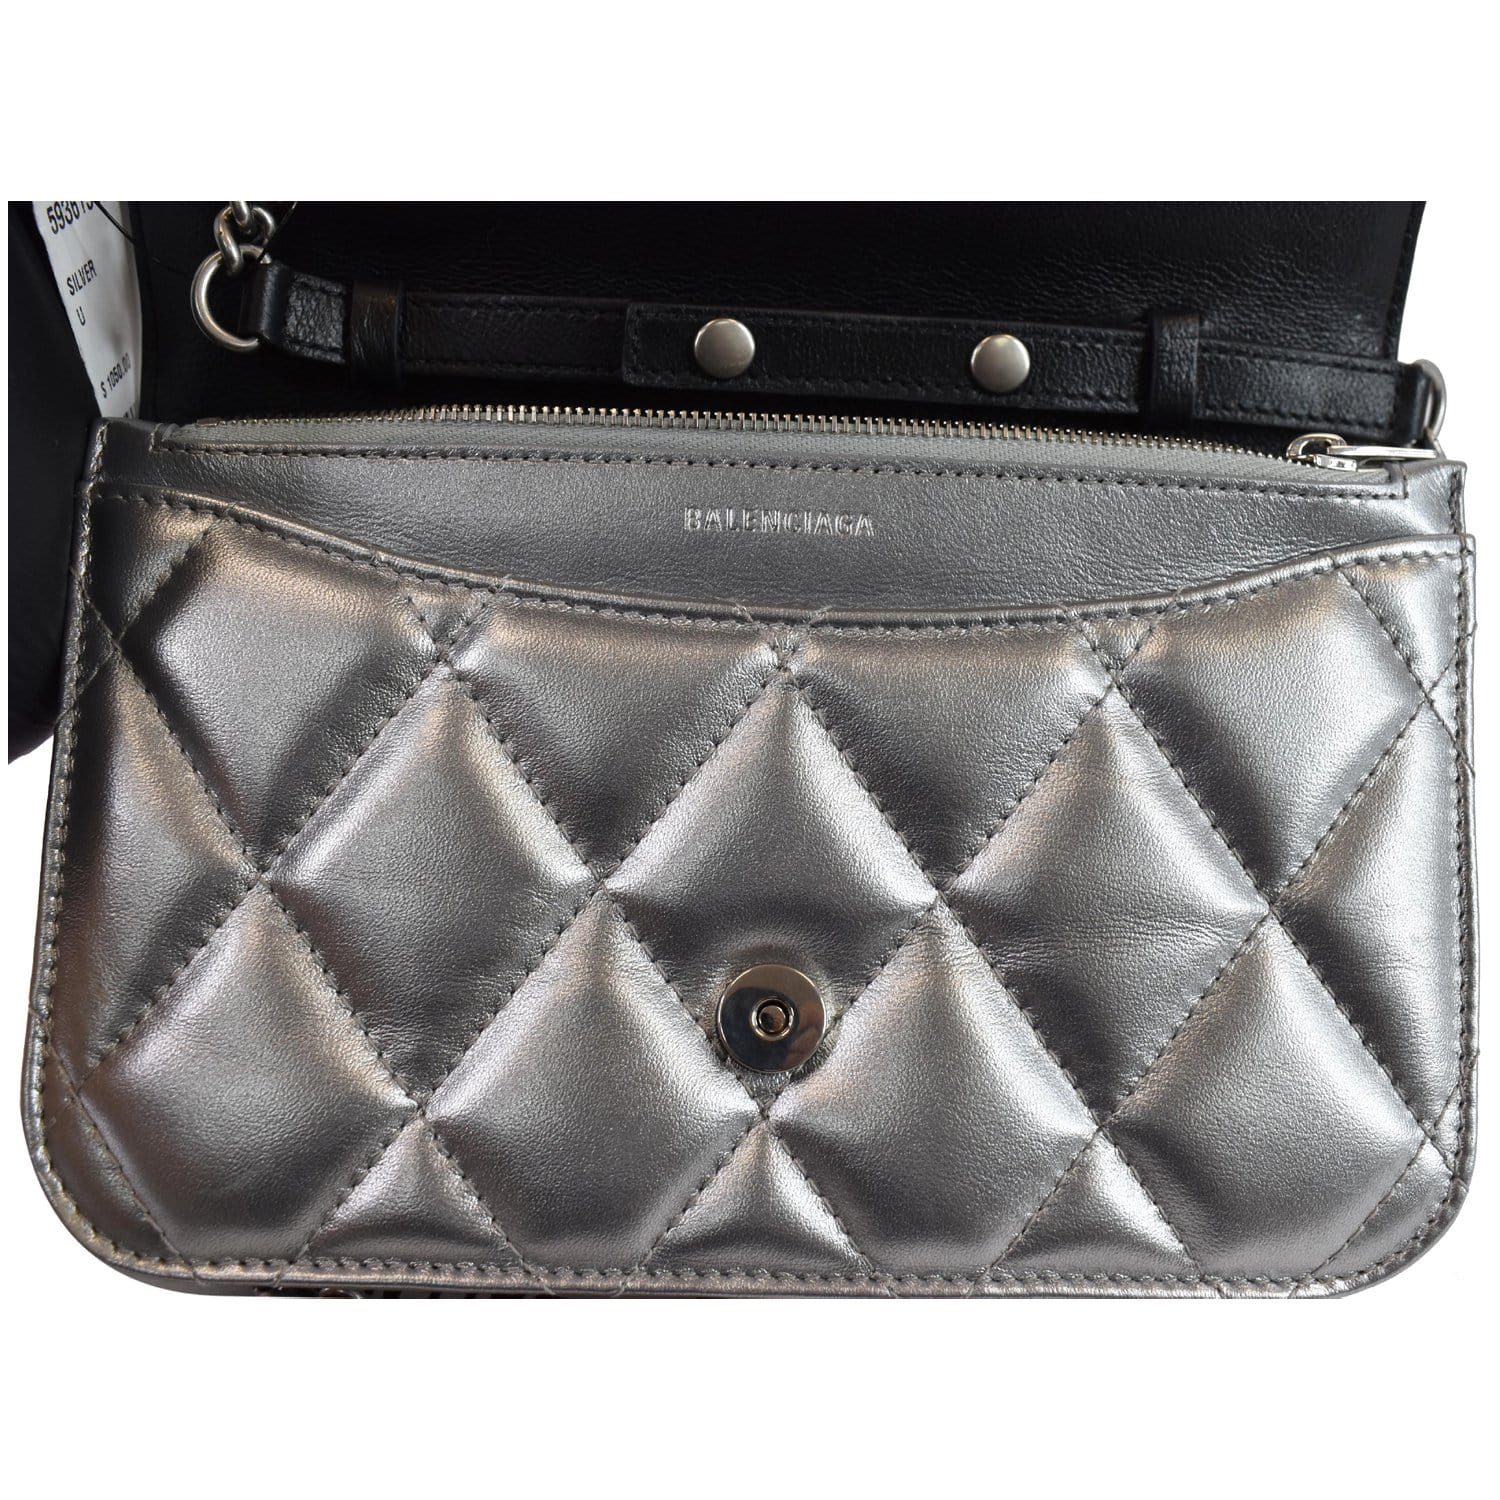 Balenciaga BB Silver Glittered Leather Wallet on Chain Bag 561507 